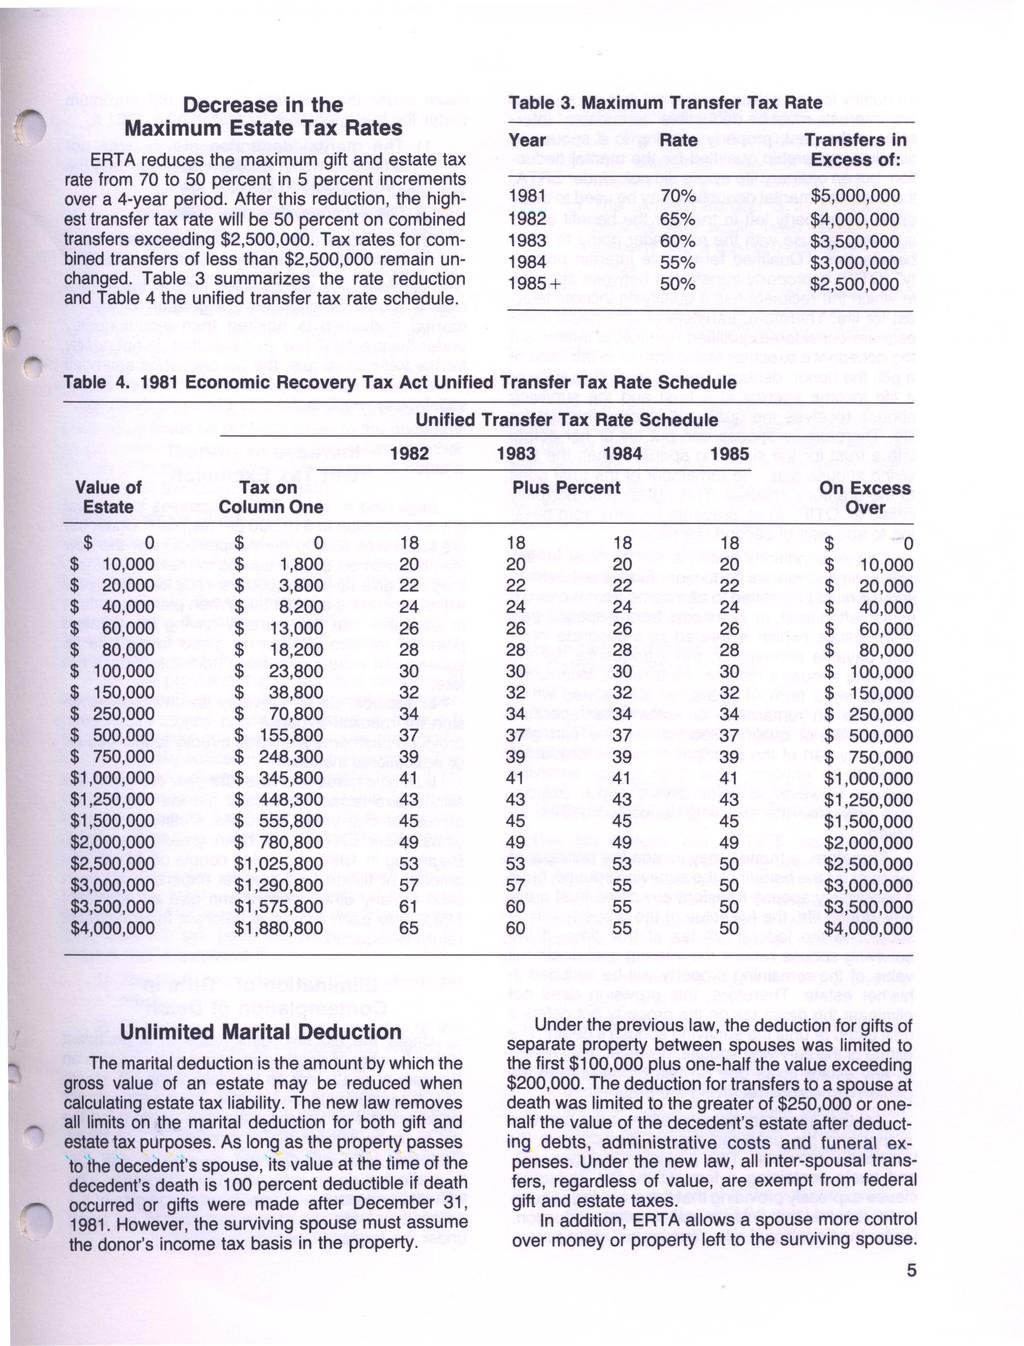 Table 3. Maximum Transfer Tax Rate Decrease in the Maximum Estate Tax Rates ERTA reduces the maximum gift and estate tax rate from 7 to 5 percent in 5 percent increments over a 4-year period.